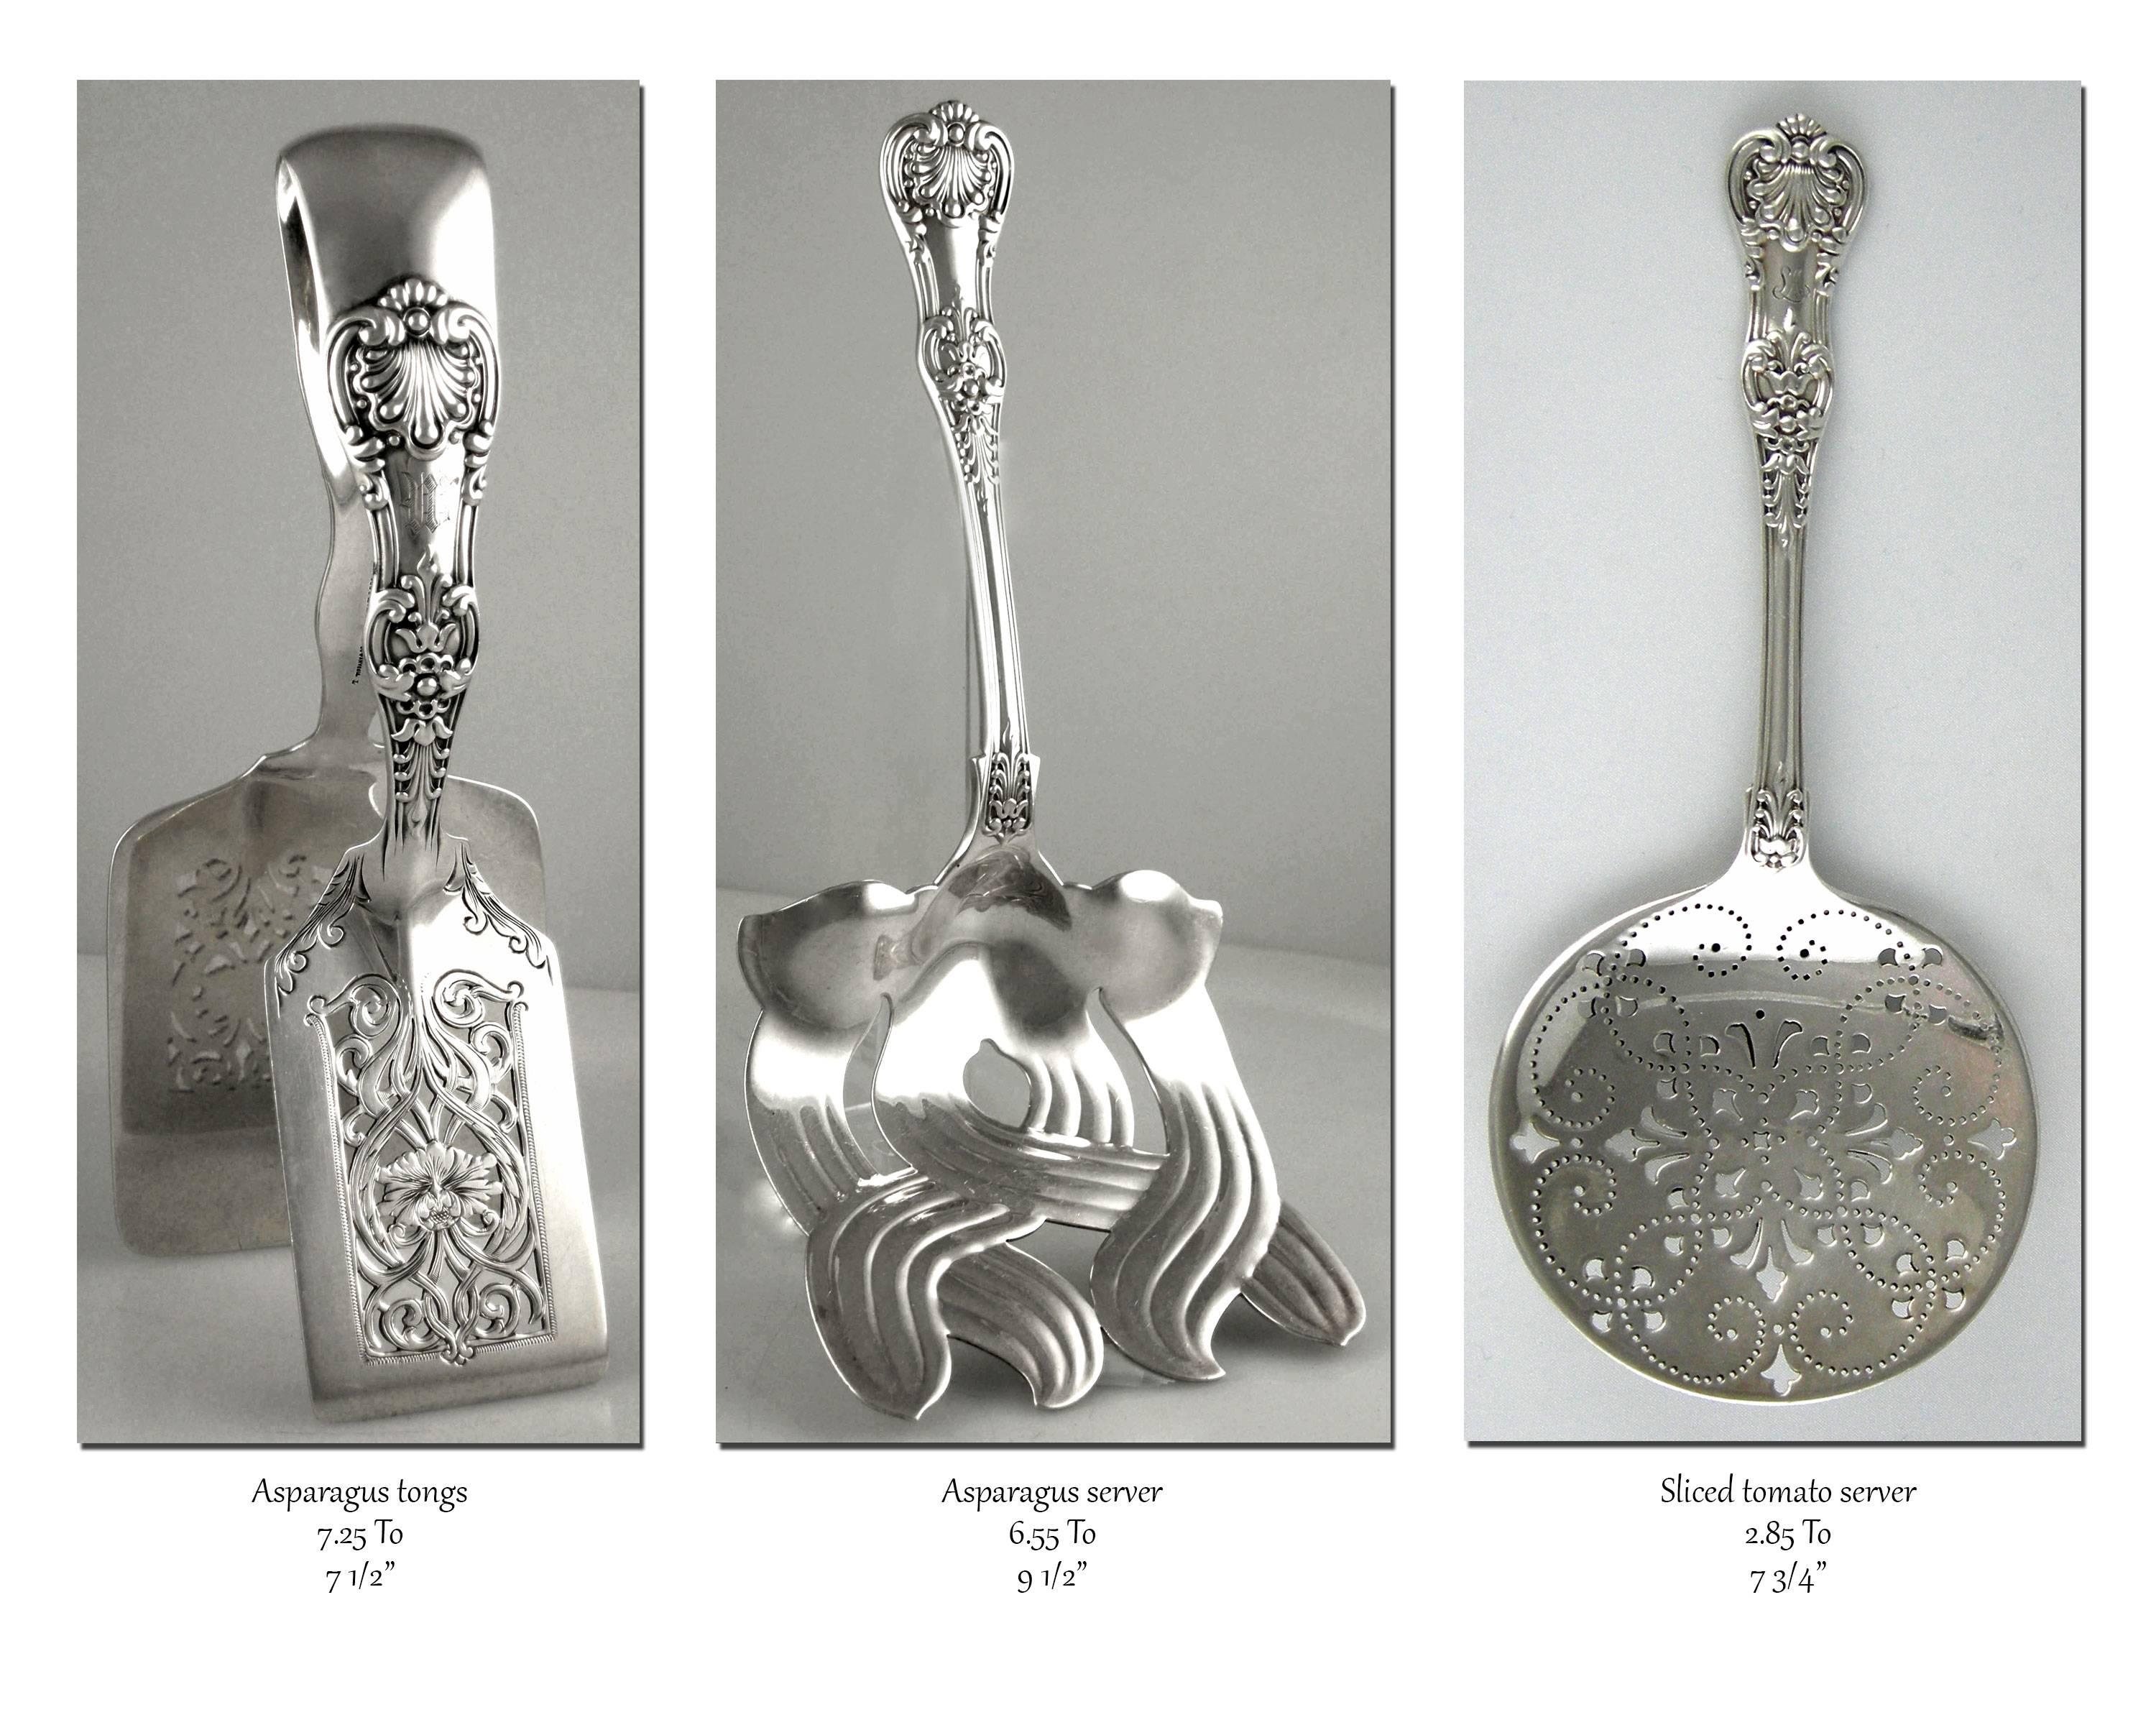 Tiffany English King 246 piece Sterling flatware set (1875-1891).

Tiffany & Co. 246 piece Sterling flatware set 
English King pattern (1875-1891) All markings before 1890.
An assembled set. Various Tiffany monograms by Tiffany.

Forks:
12